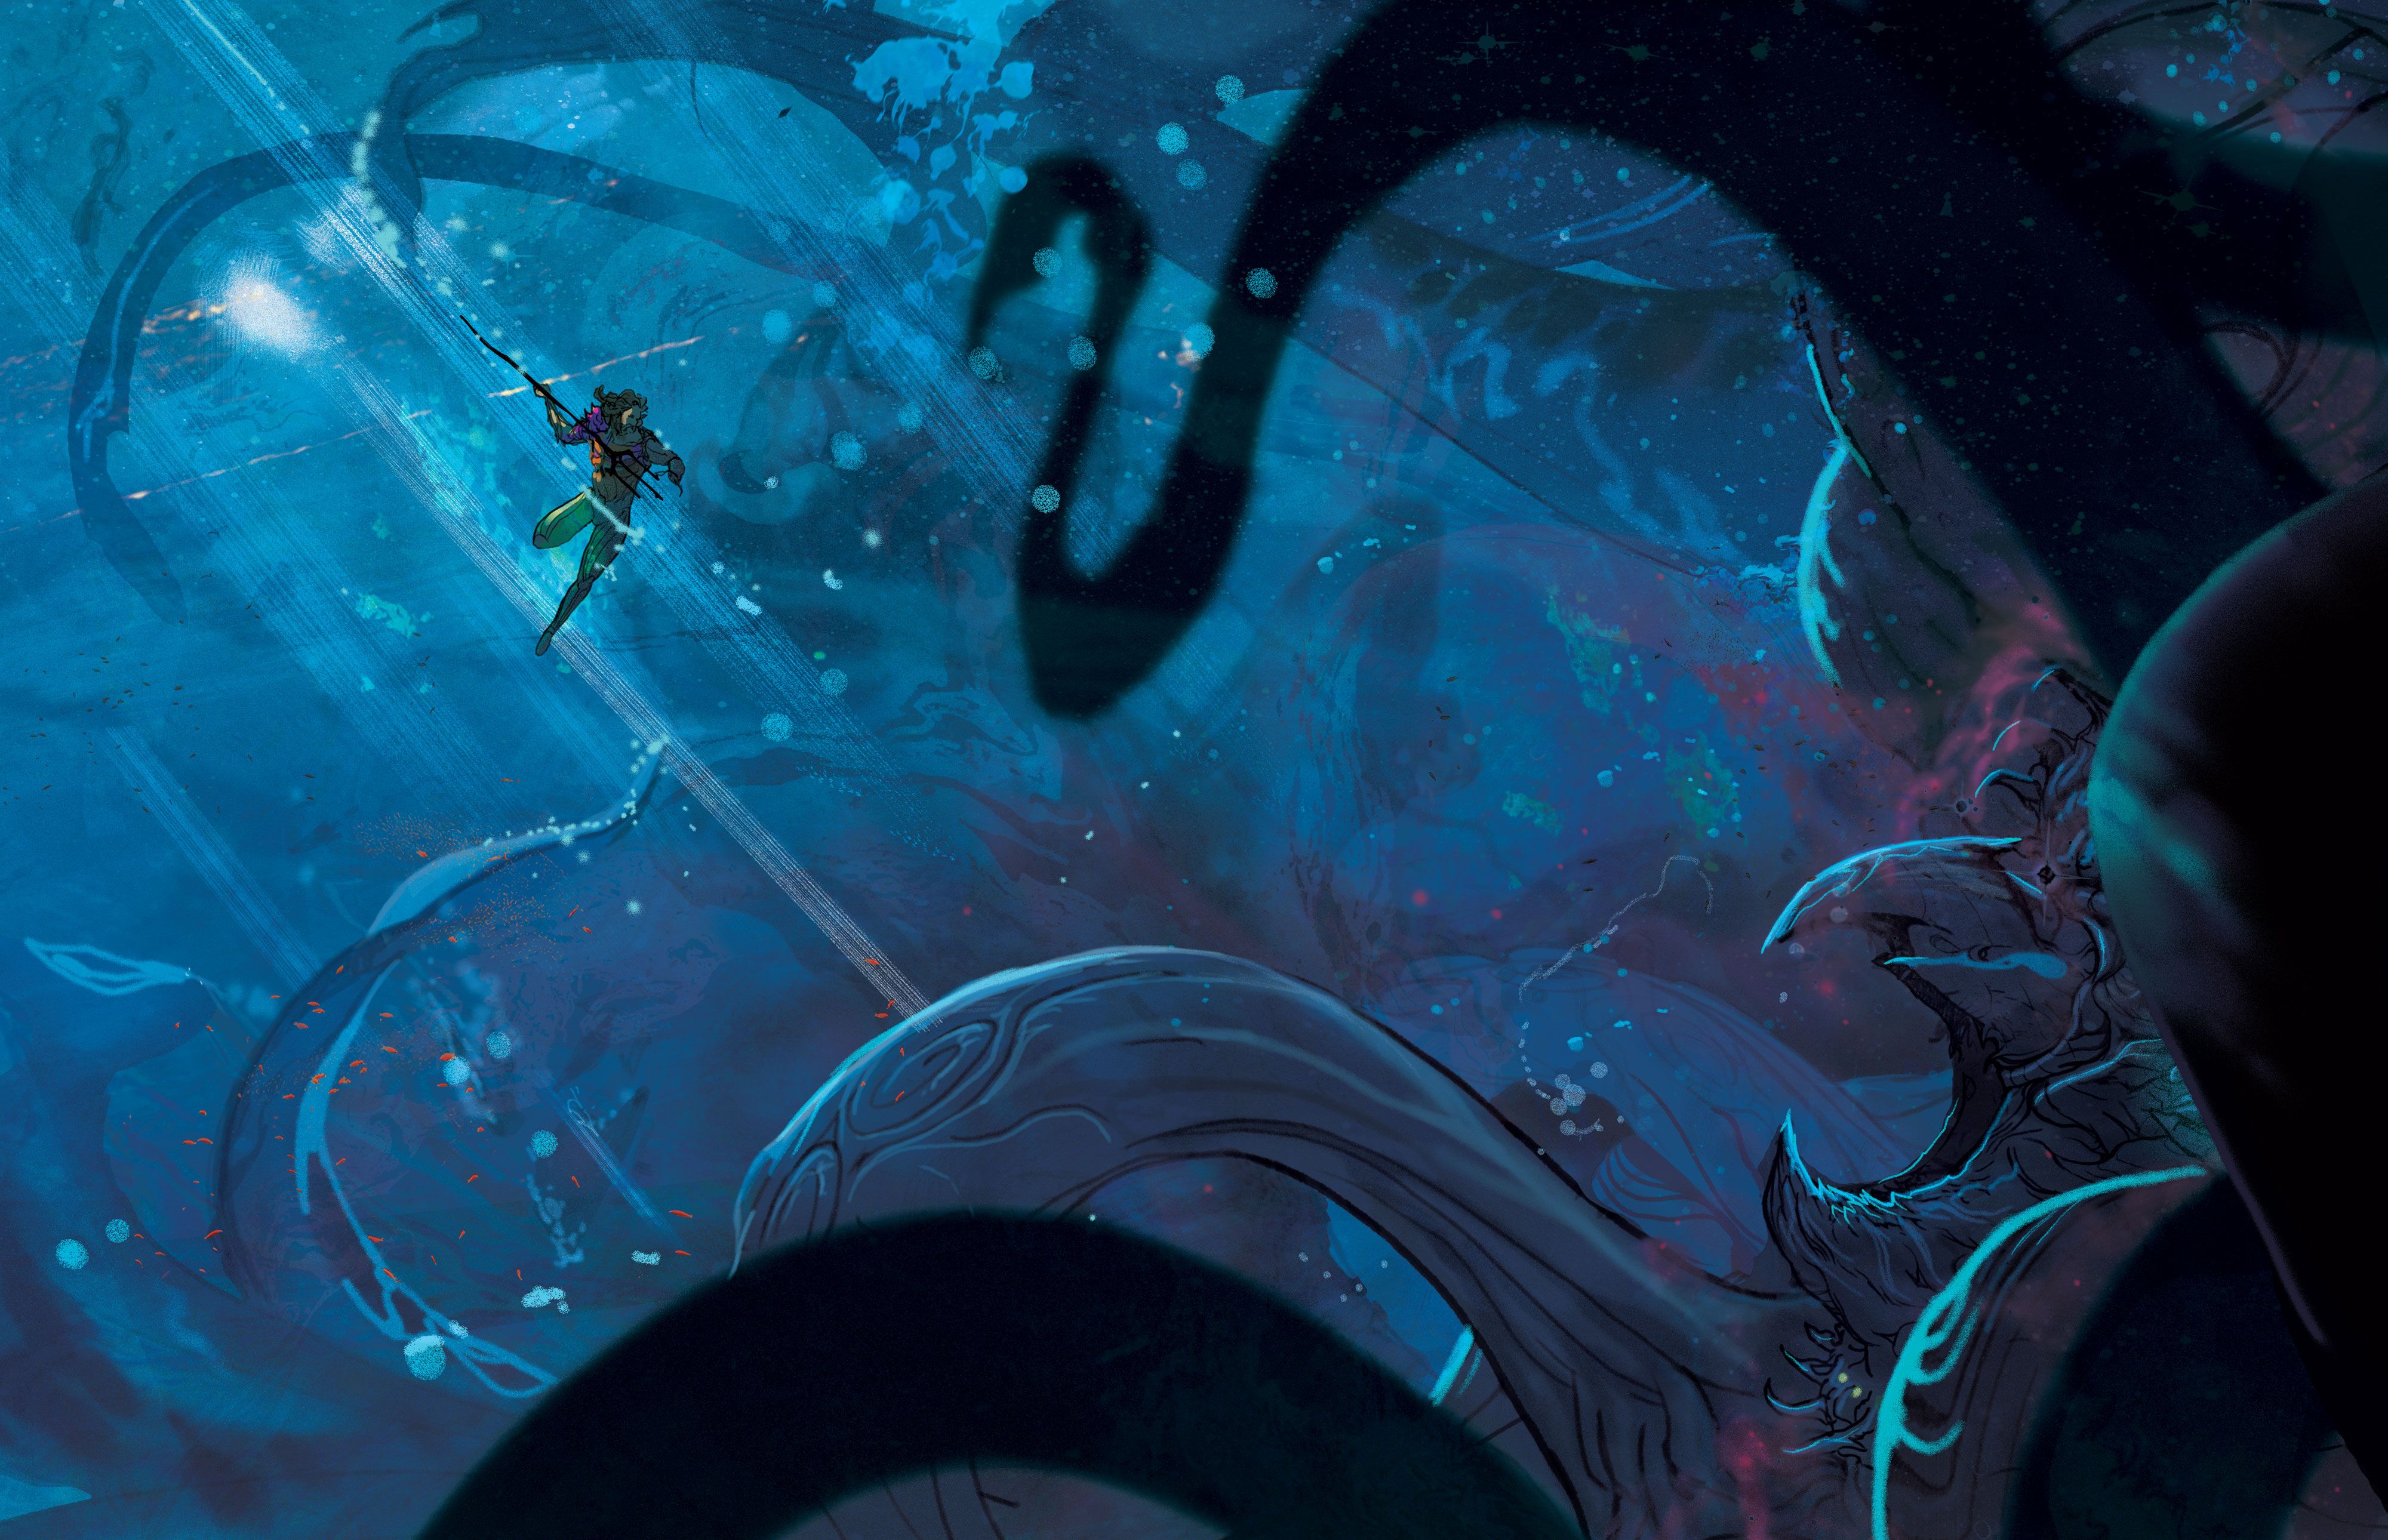 Art for Aquaman: Andromeda, a DC Black Label series by Ram V. and Christian Ward.